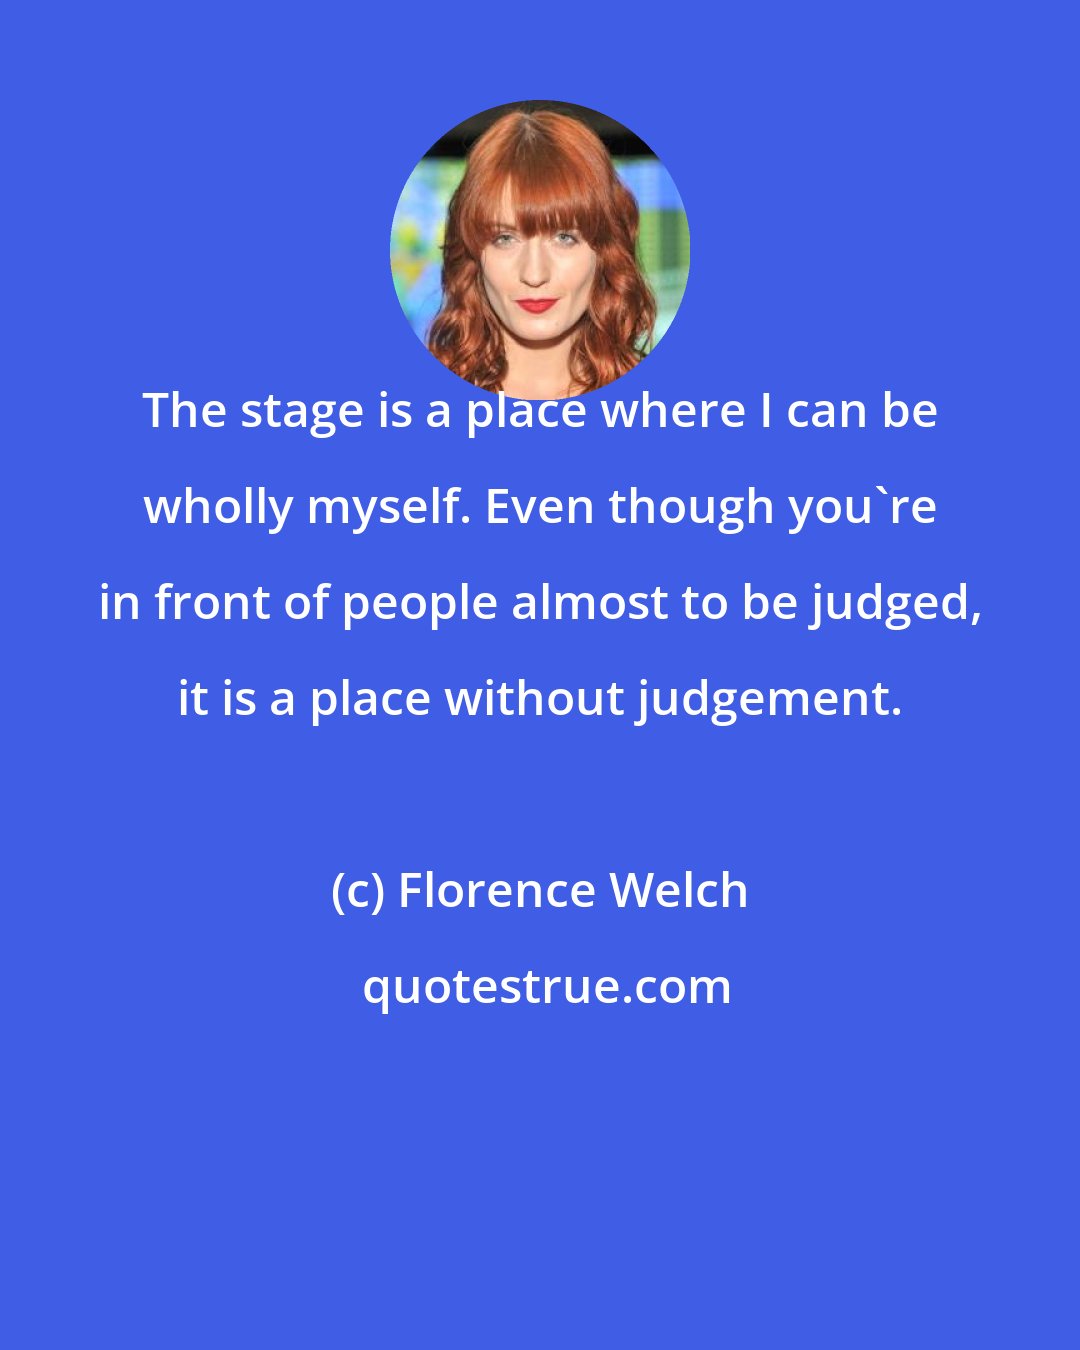 Florence Welch: The stage is a place where I can be wholly myself. Even though you're in front of people almost to be judged, it is a place without judgement.